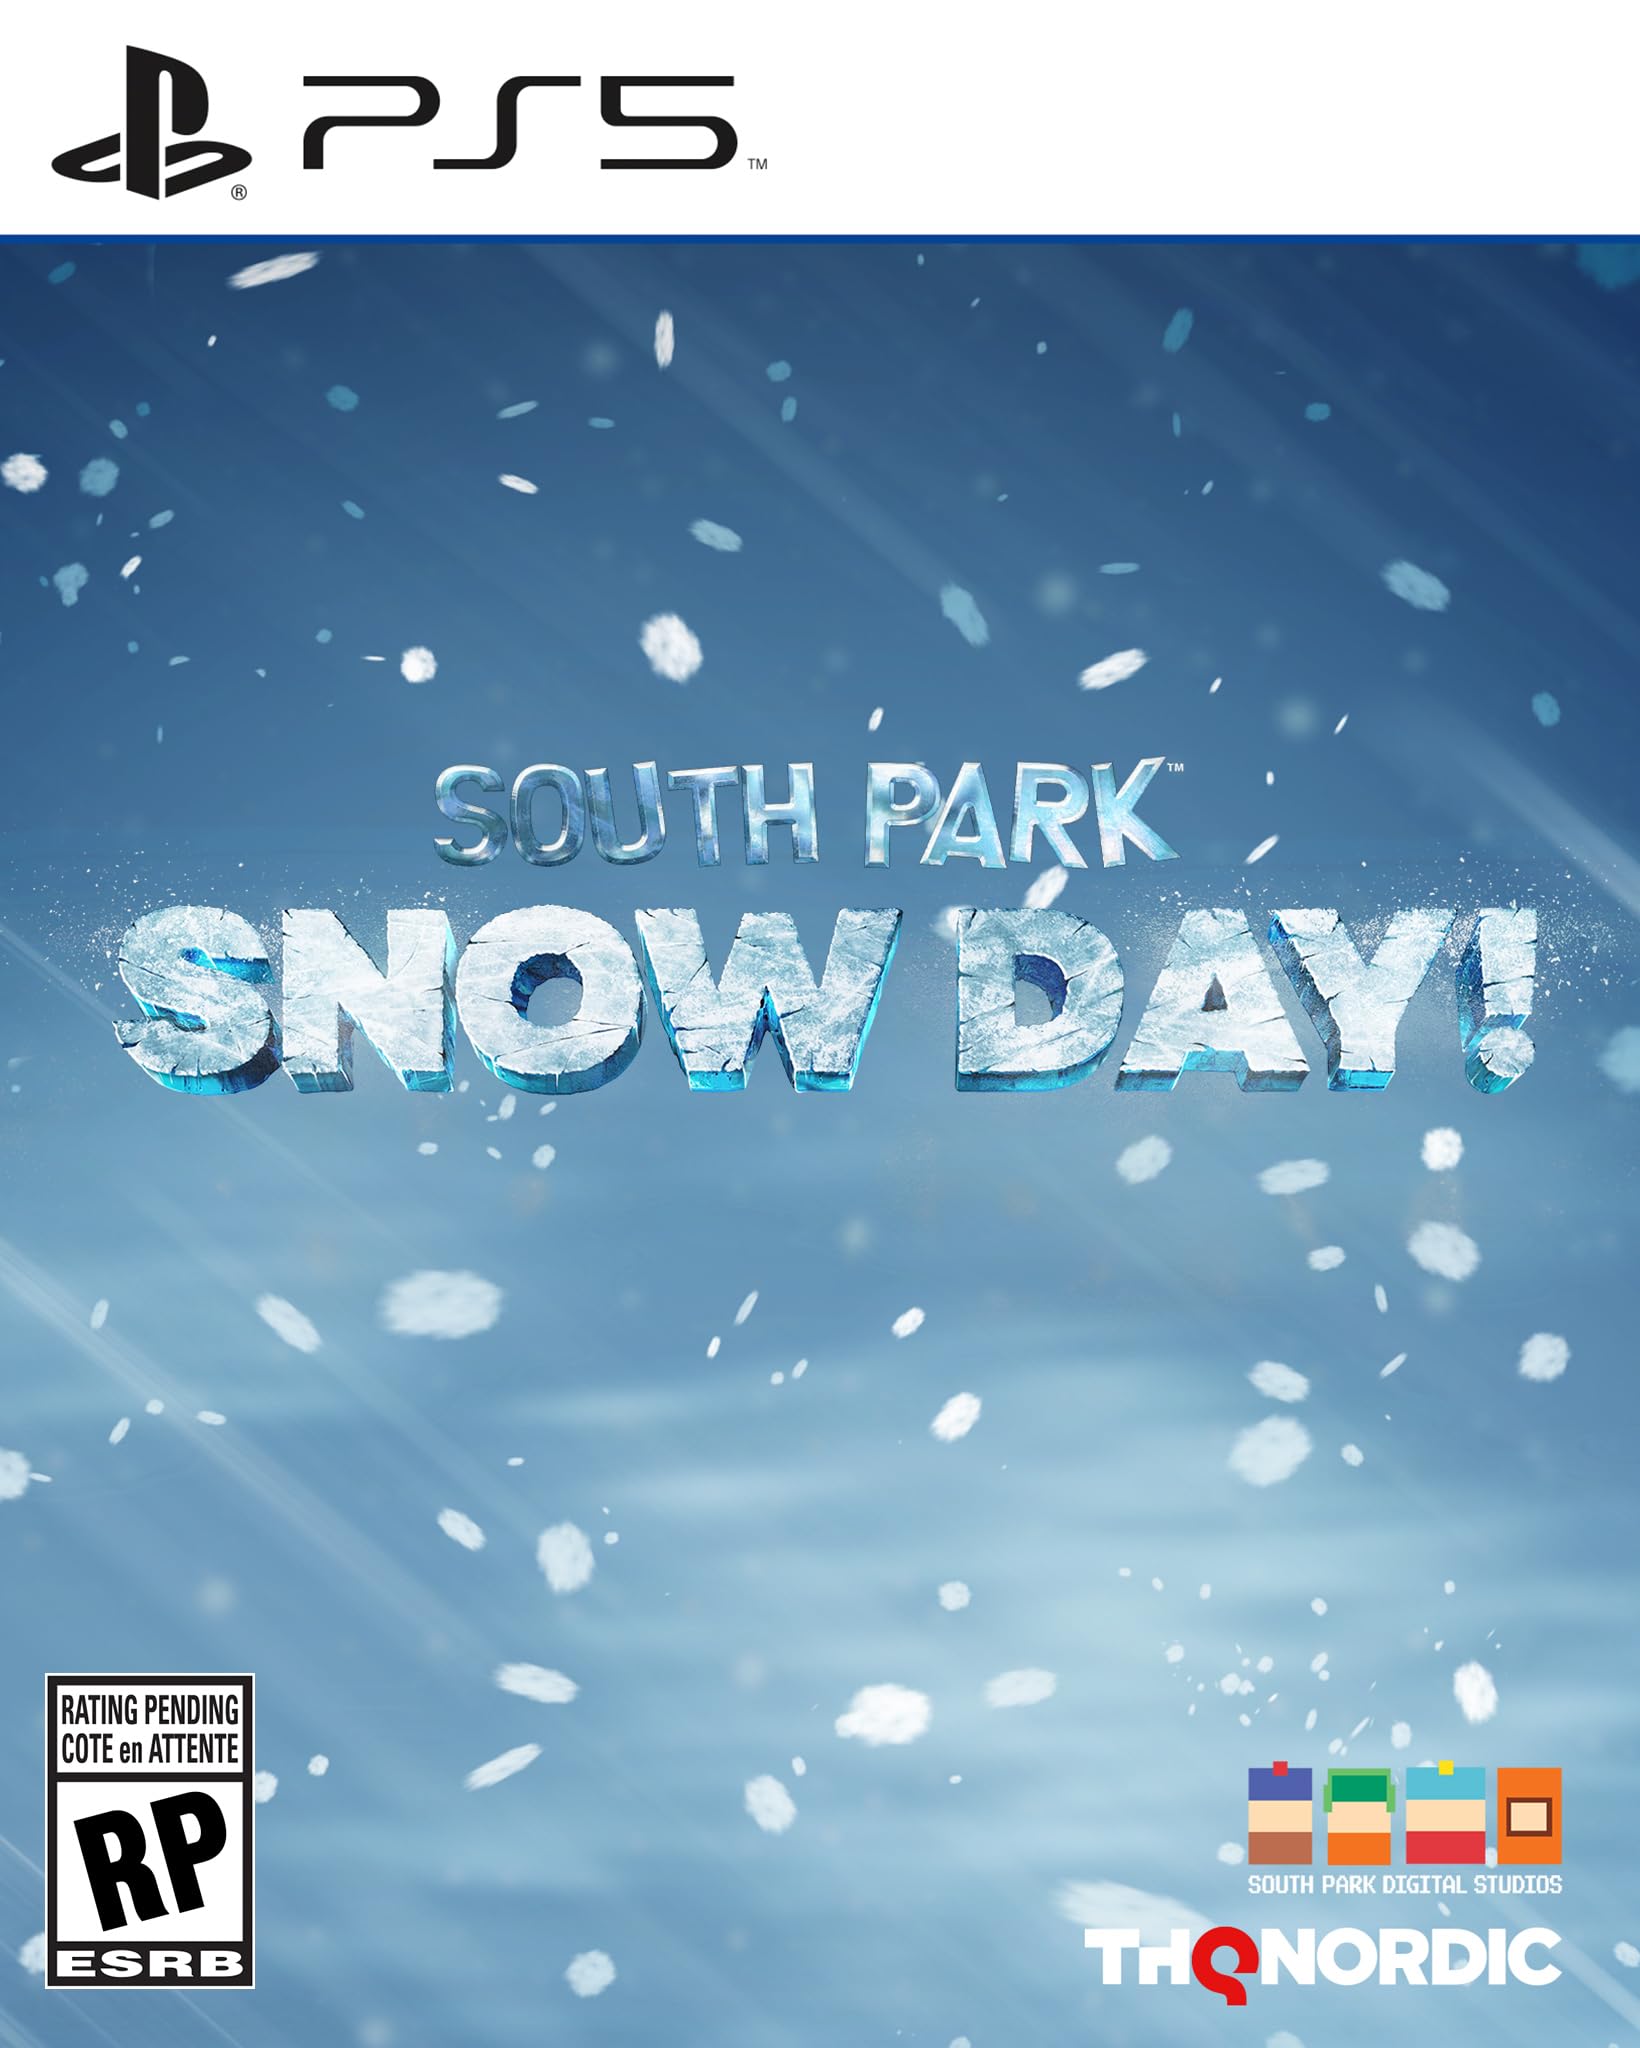 SOUTH PARK - SNOW DAY! - PlayStation 5